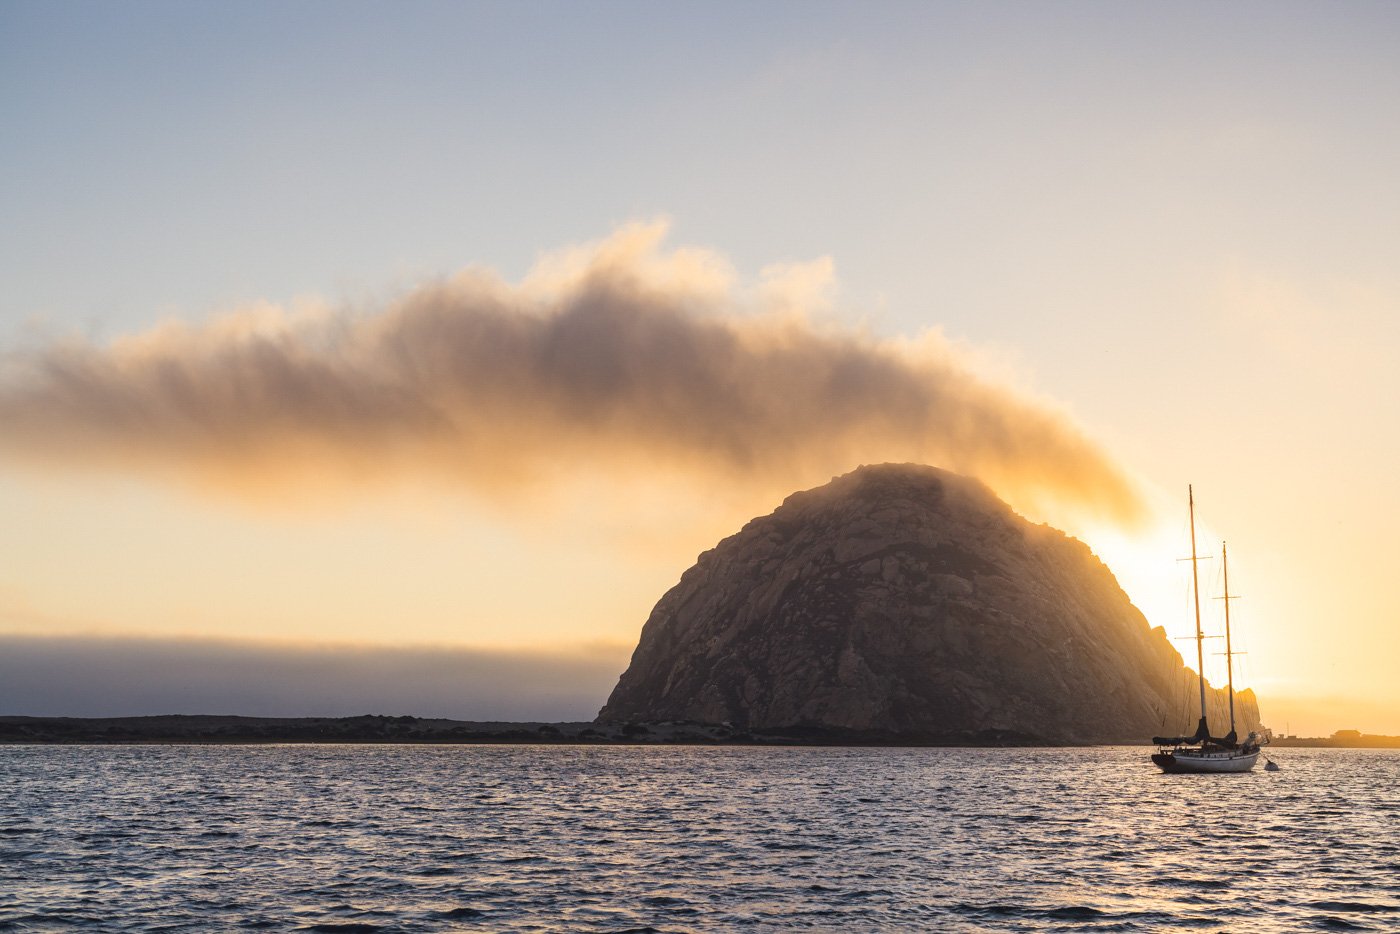 morro rock at sunset in california with ship in front